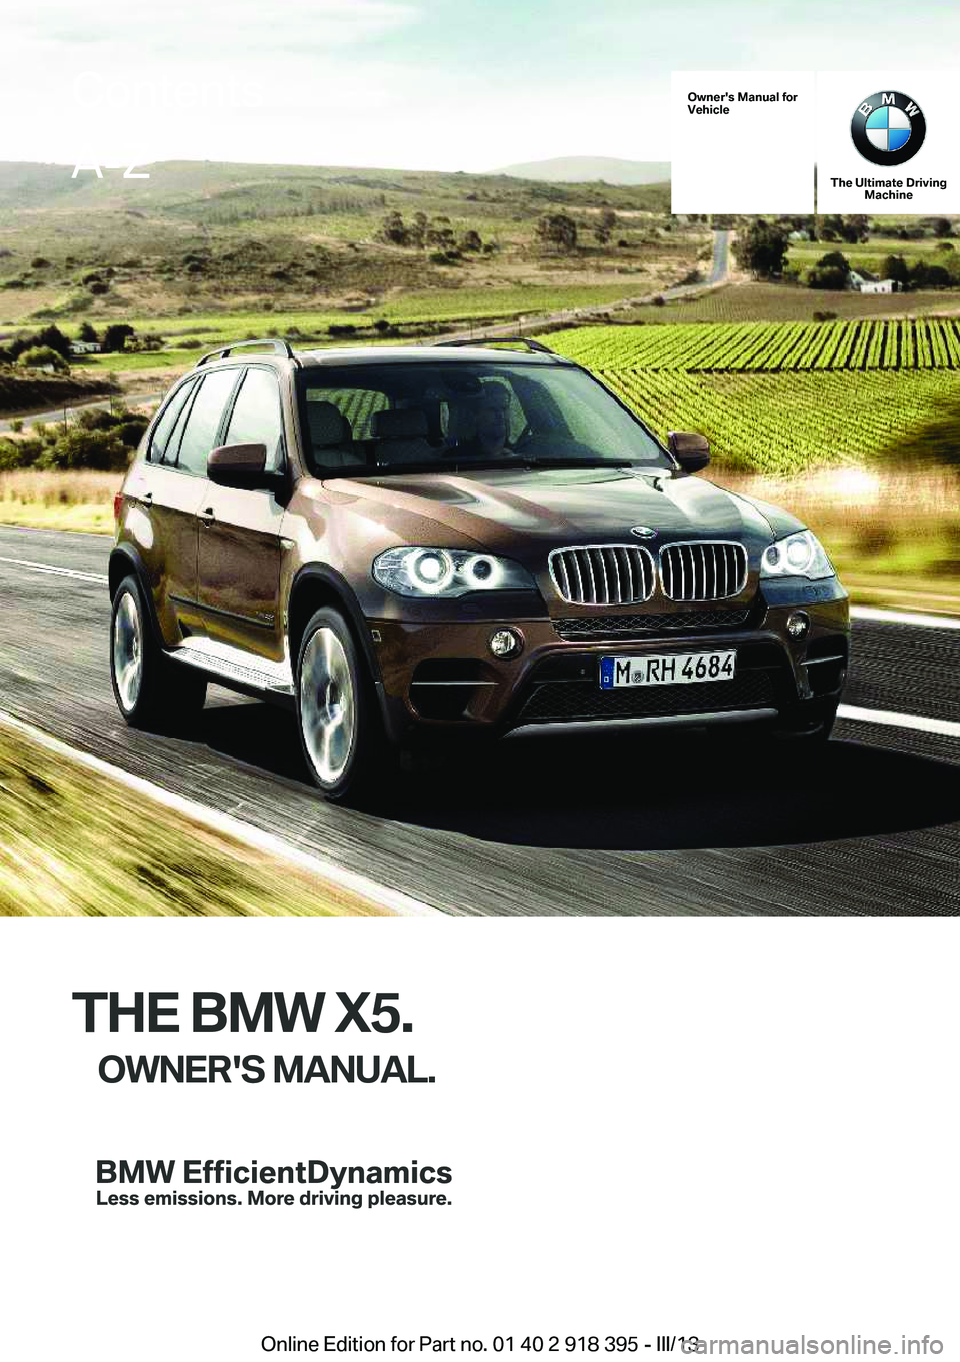 BMW X5 XDRIVE 35I PREMIUM 2013  Owners Manual Owner's Manual for
Vehicle
The Ultimate Driving Machine
THE BMW X5.
OWNER'S MANUAL.
ContentsA-Z
Online Edition for Part no. 01 40 2 918 395 - III/13   